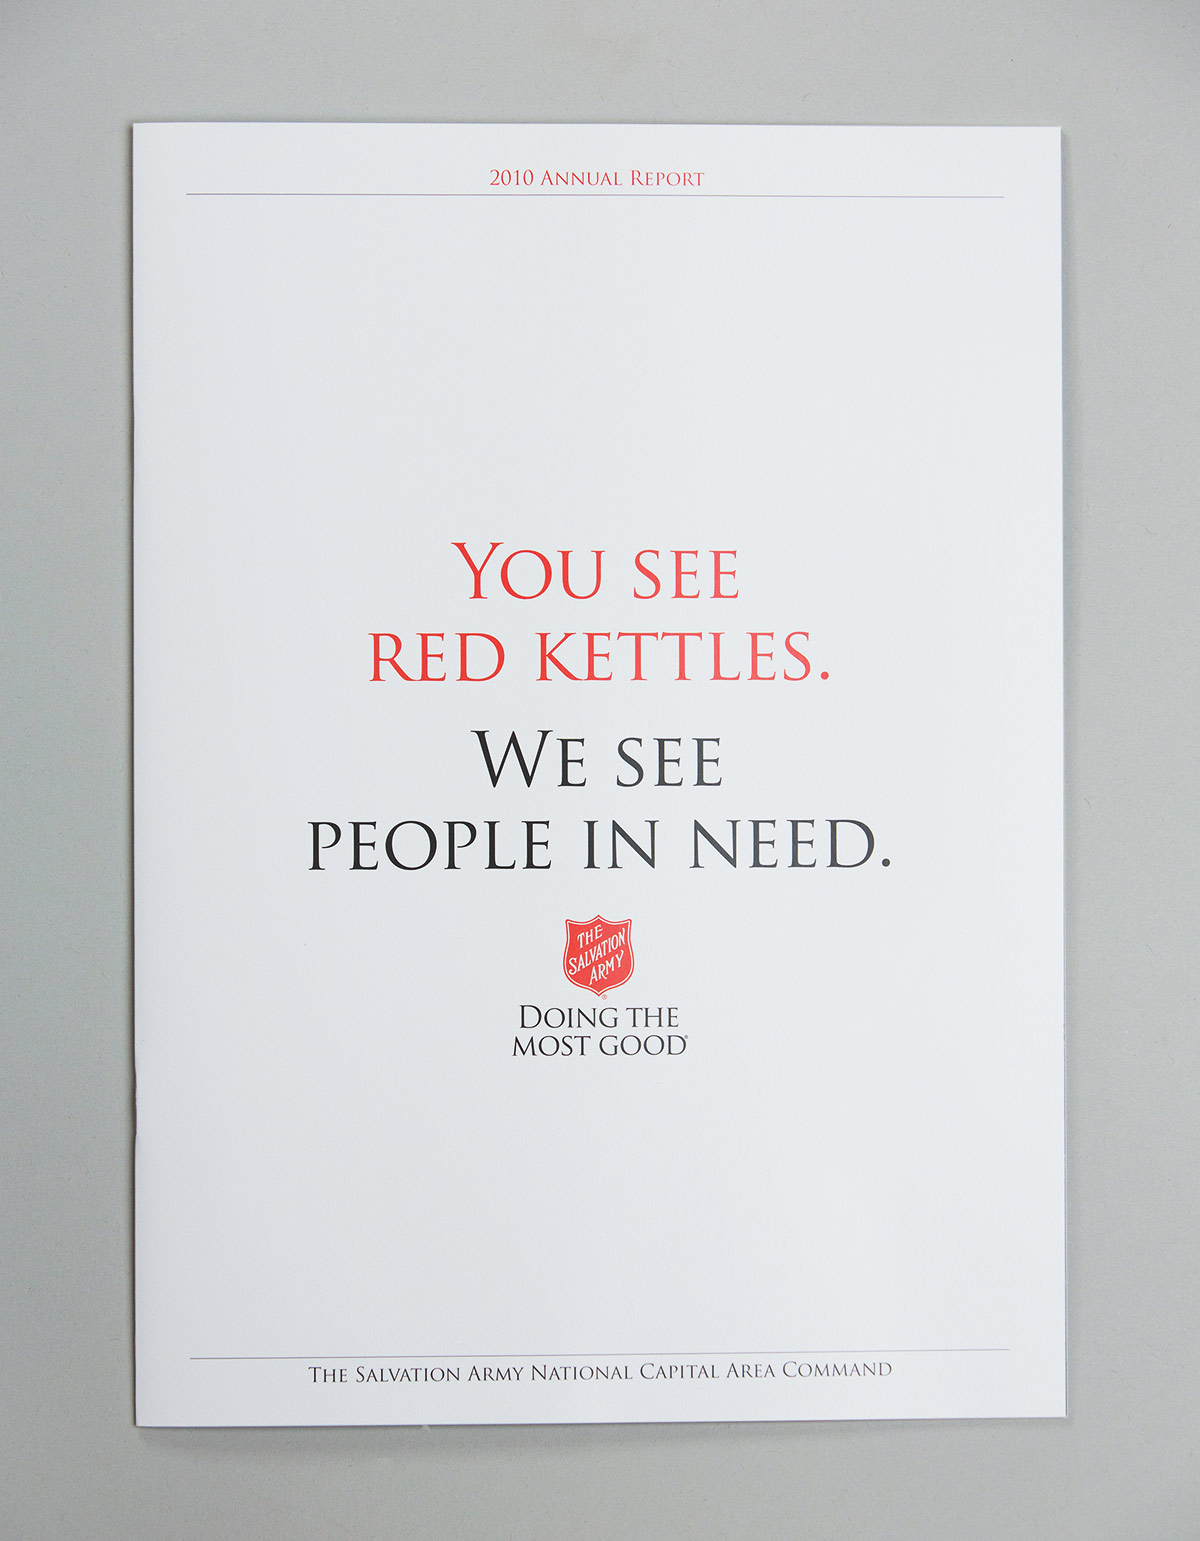 https://designpositive.co/wp-content/uploads/2013/10/annual-report-design-Salvation-Army-1-cover.jpg